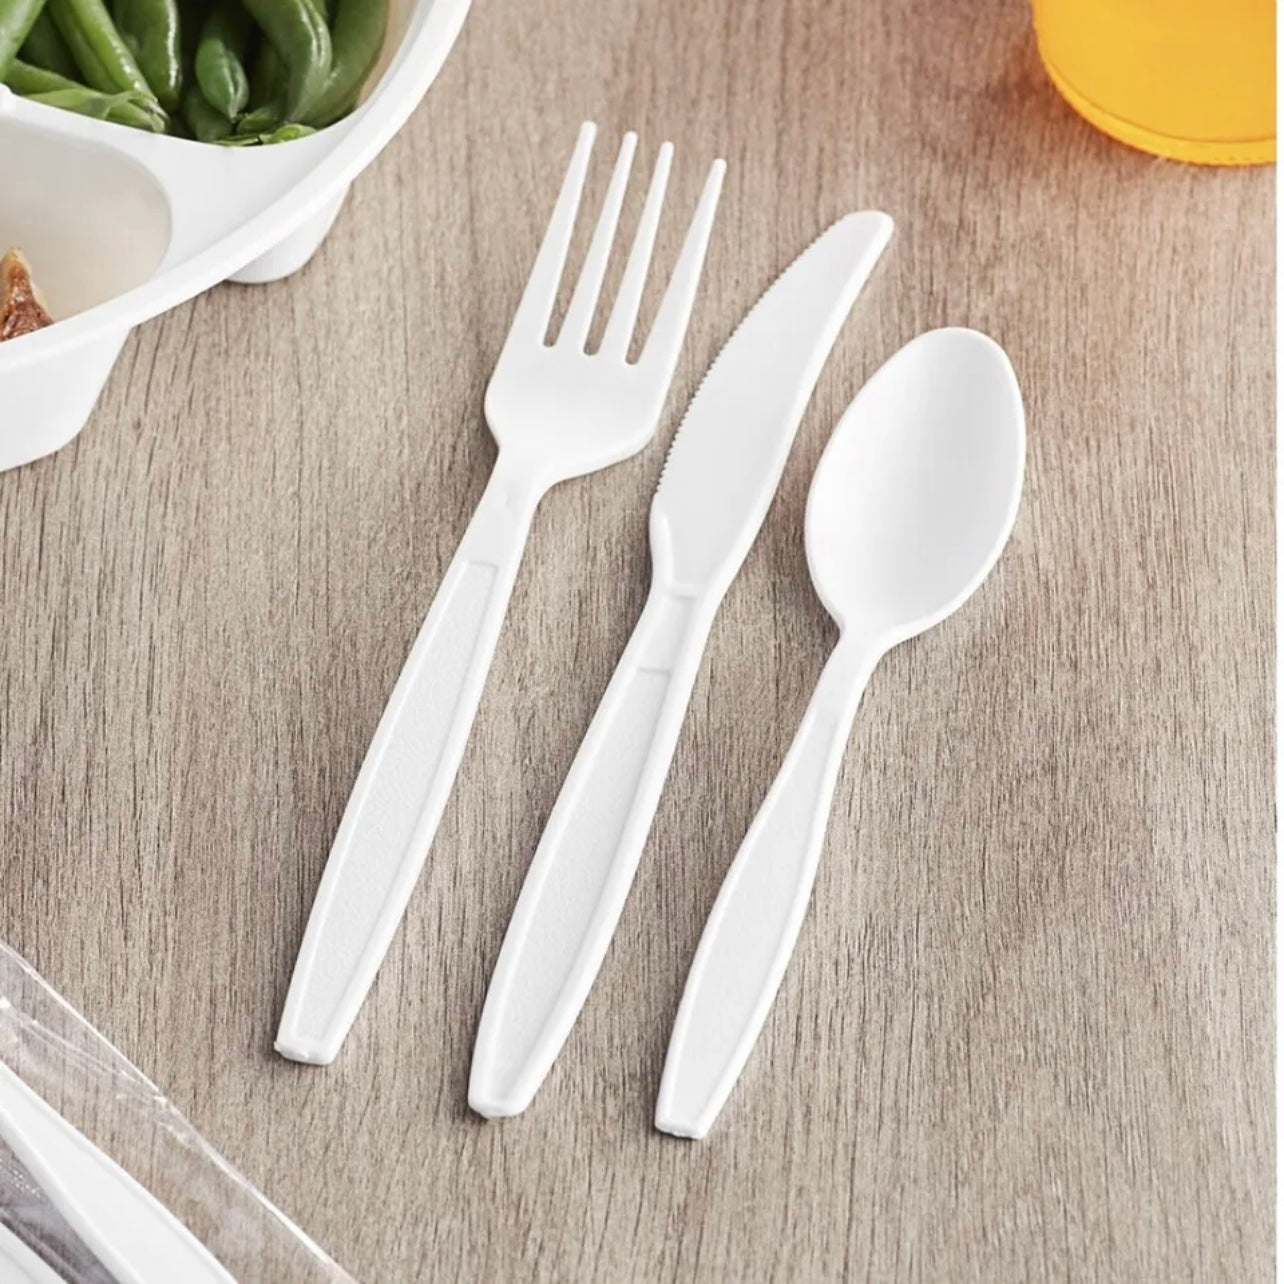 Wrapped White Heavy Weight Plastic Cutlery Packs with Knife, Fork, Spoon Party